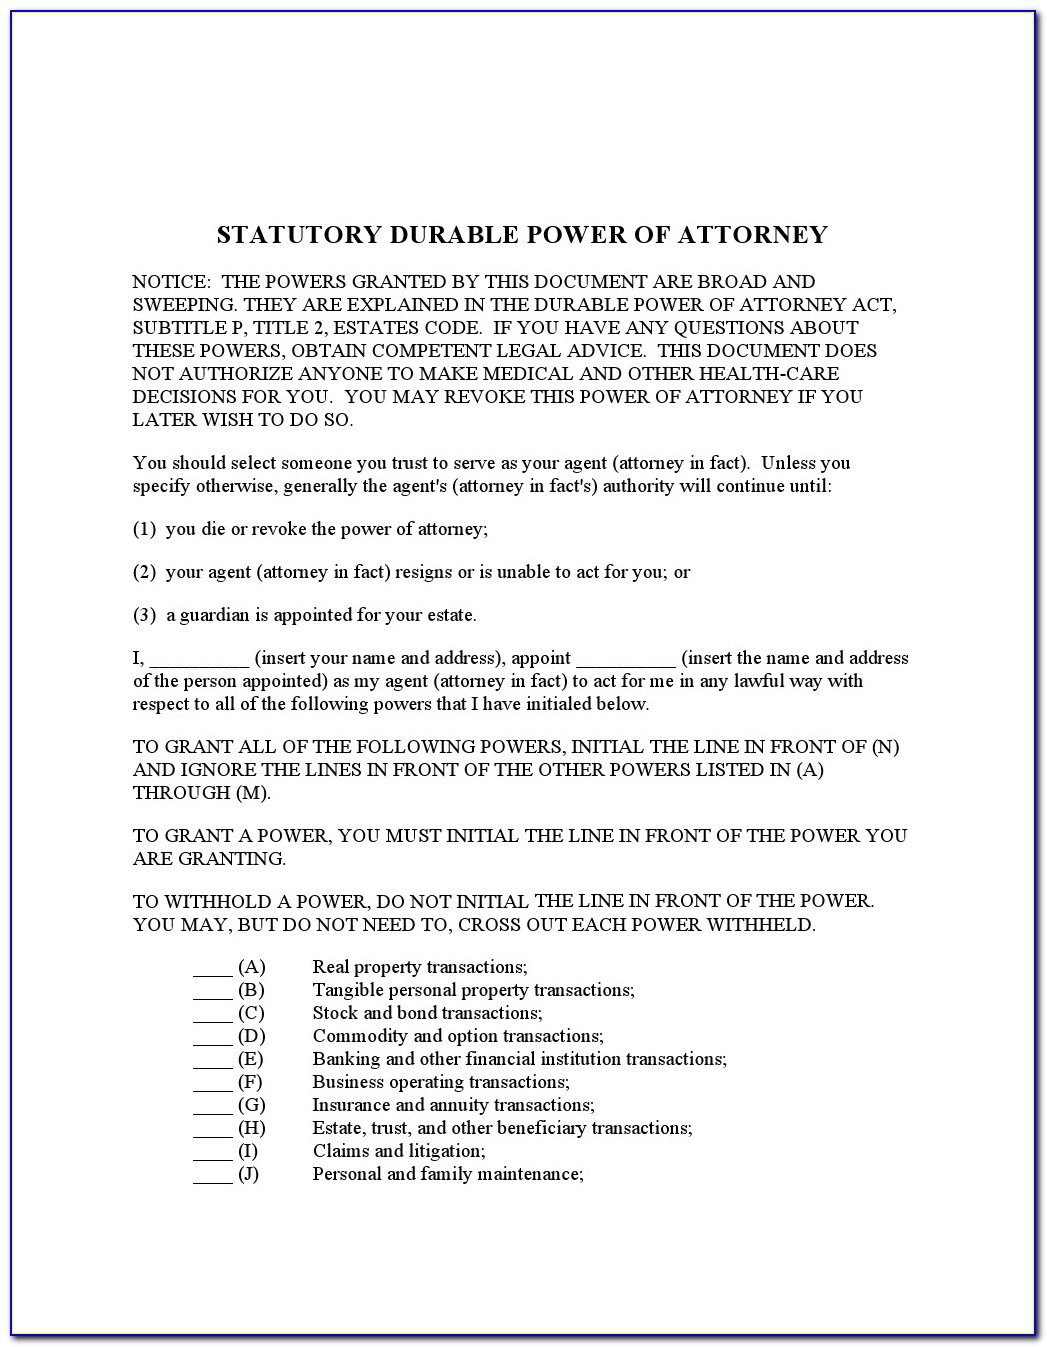 Texas Statutory Durable Power Of Attorney Form 2017